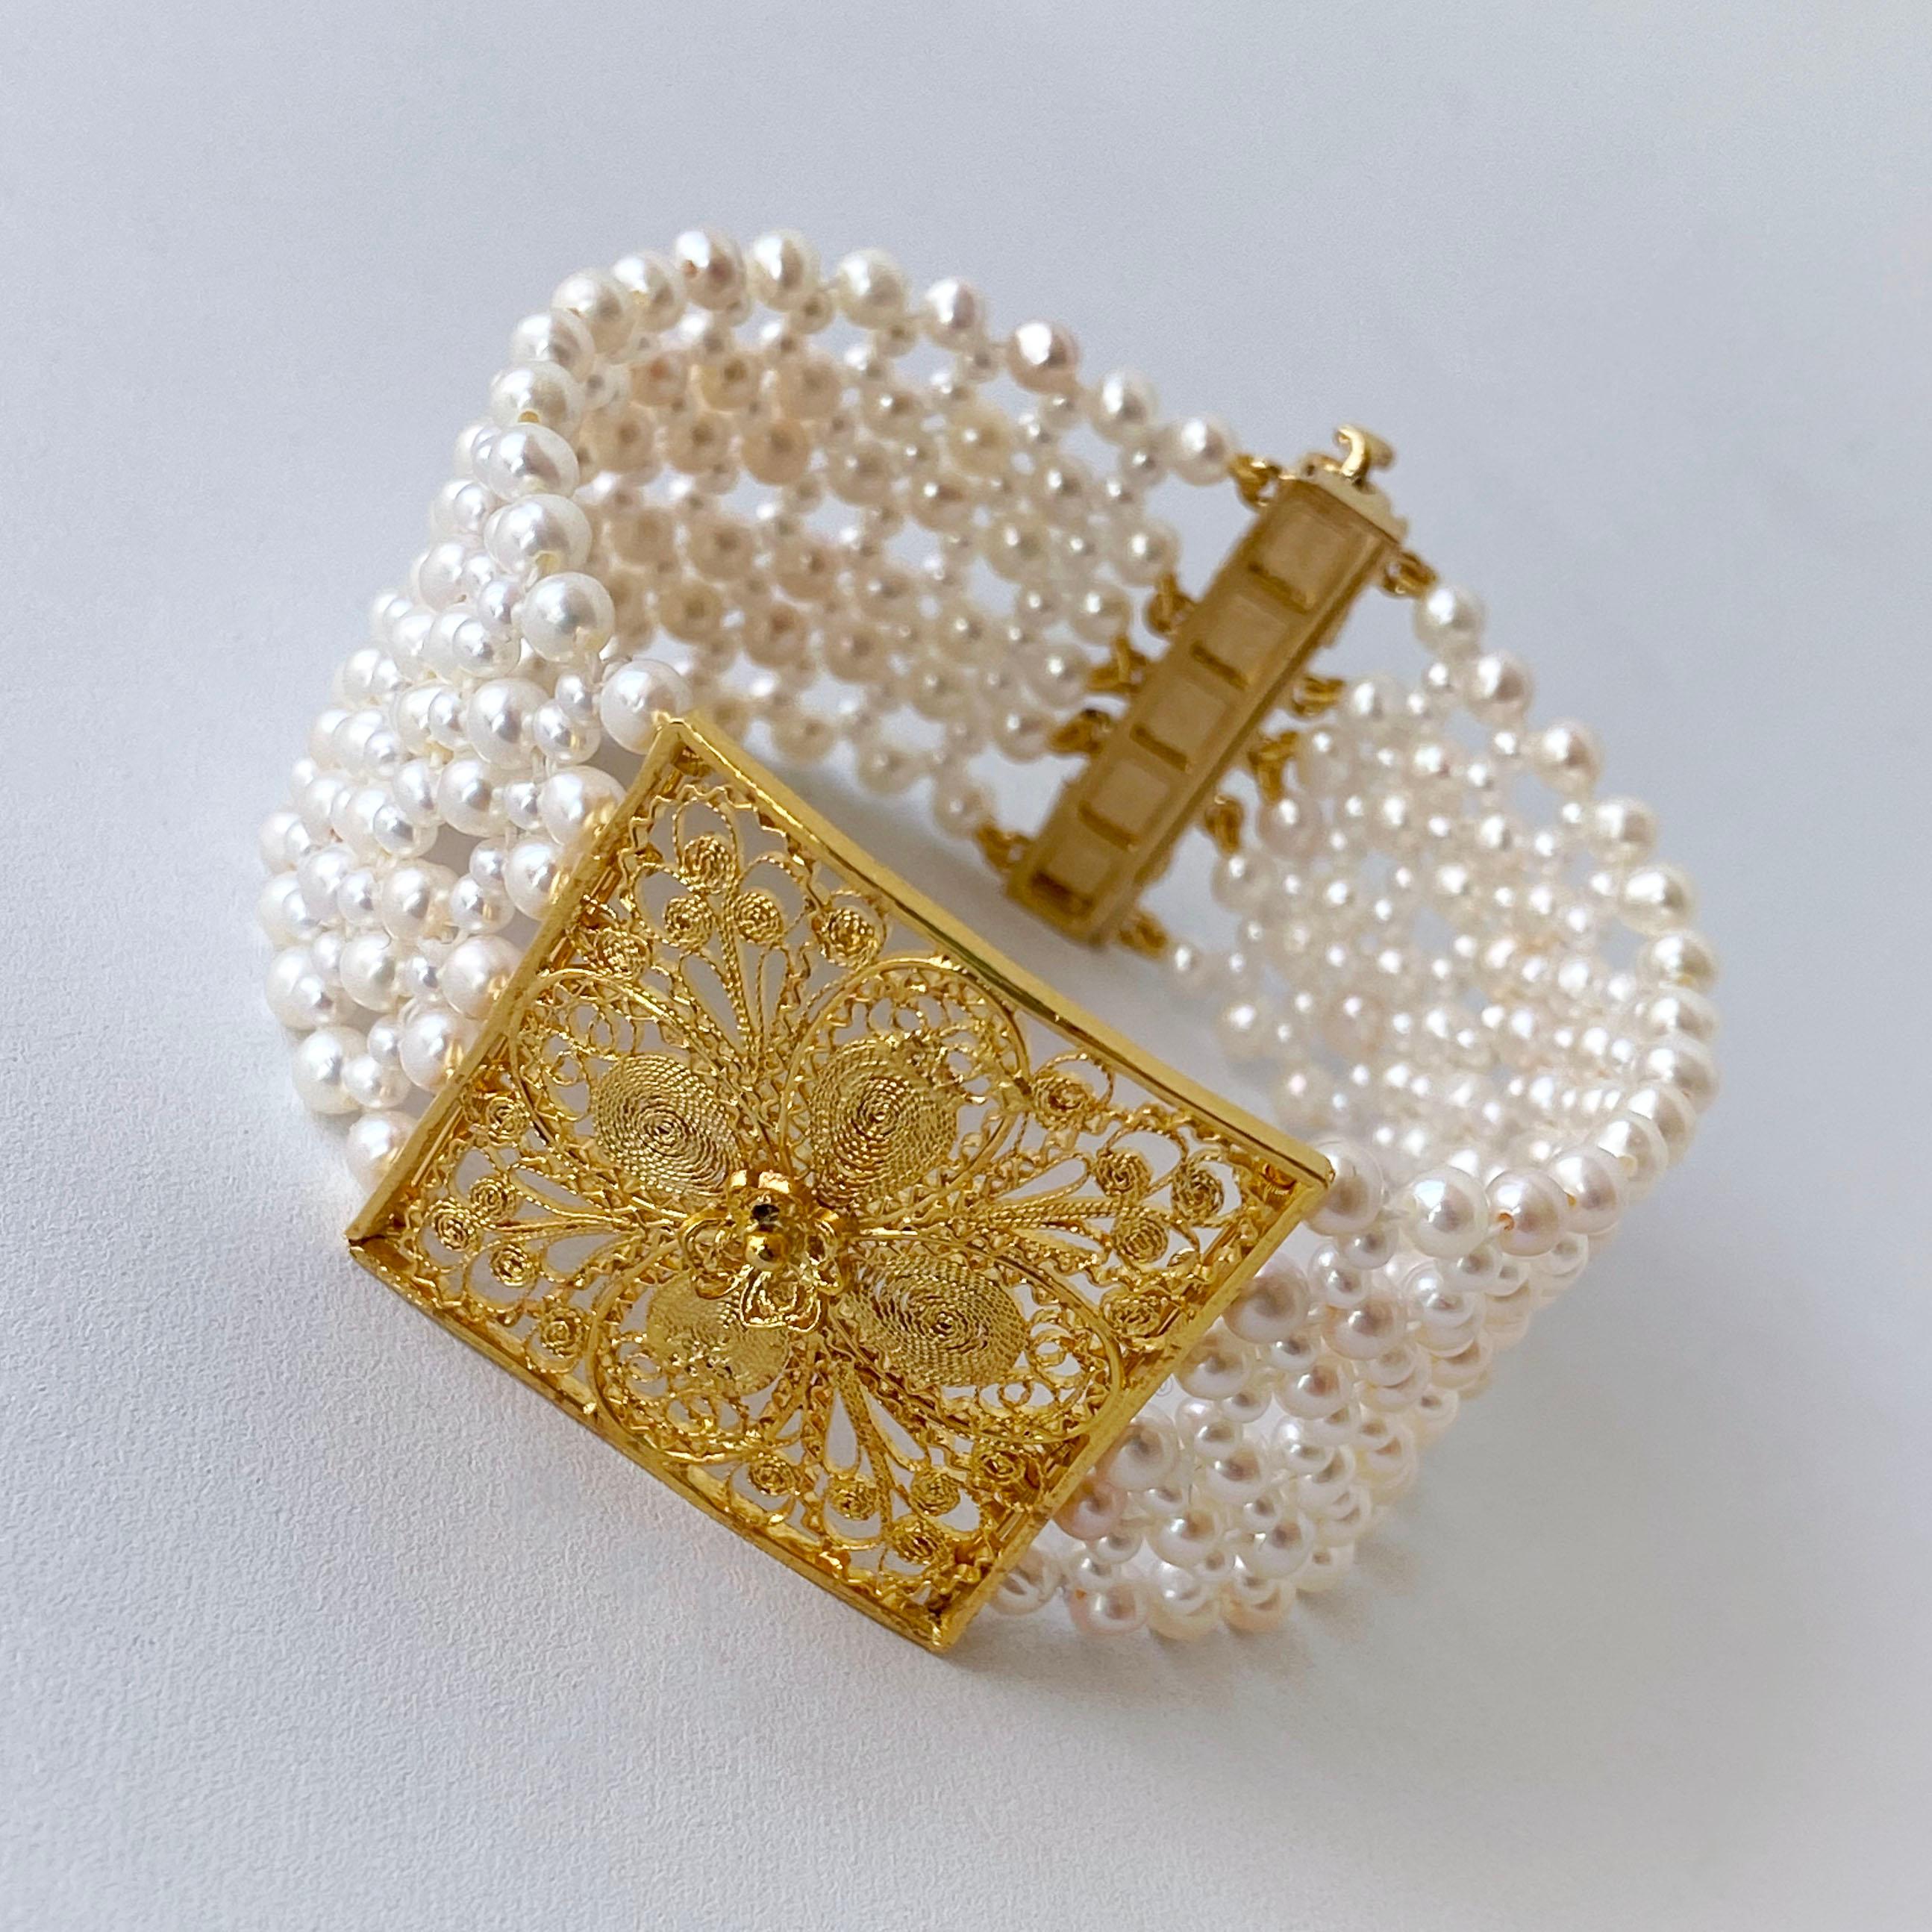 Artisan Marina J. Woven Pearl Bracelet with 18k Yellow Gold Floral Centerpiece & Clasp